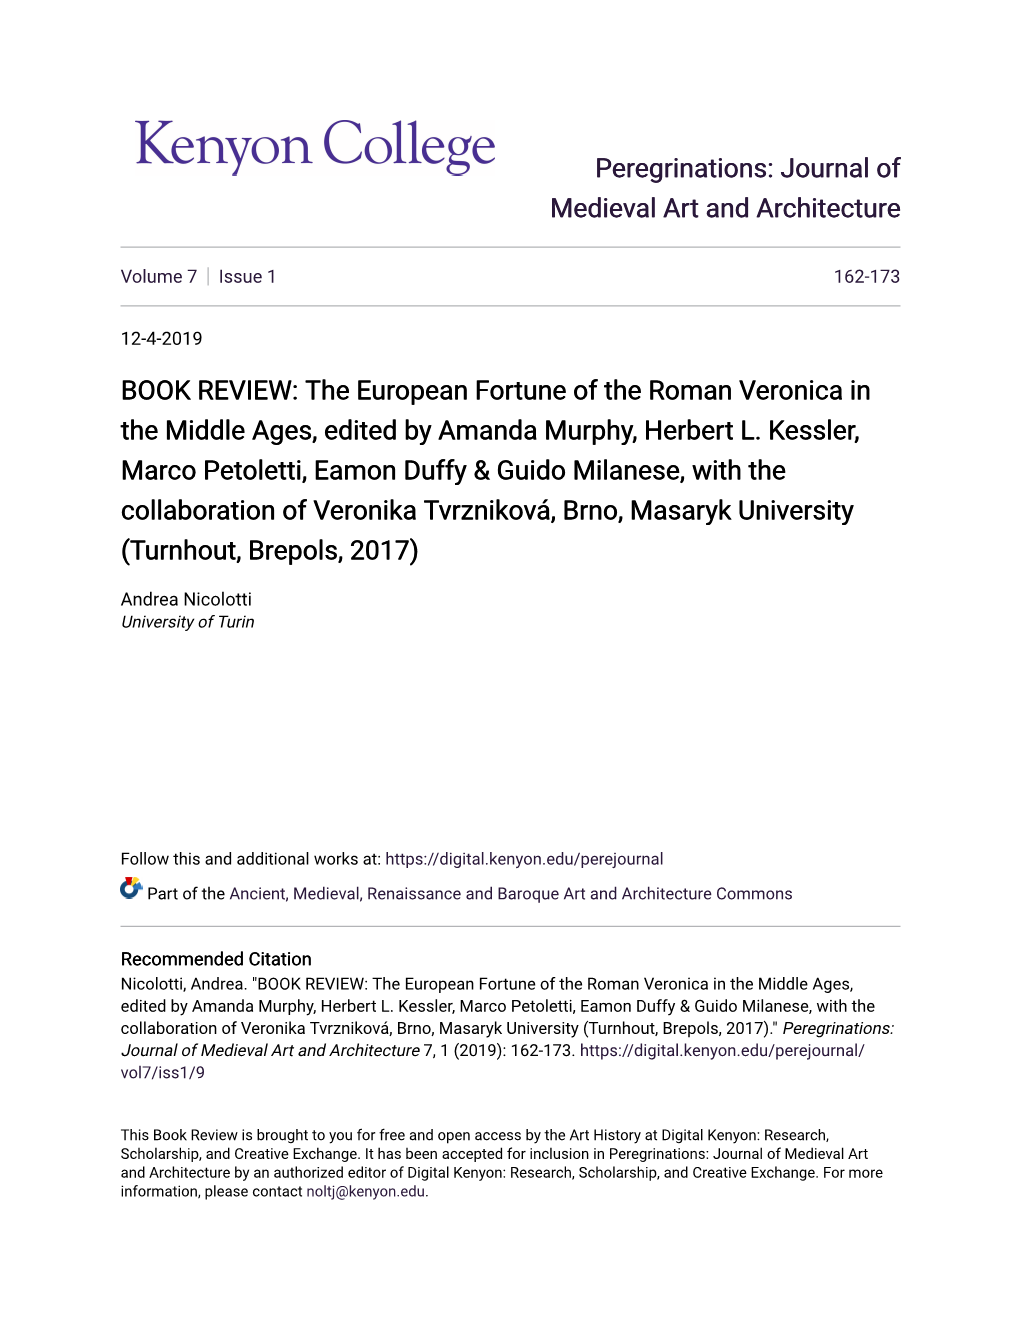 The European Fortune of the Roman Veronica in the Middle Ages, Edited by Amanda Murphy, Herbert L